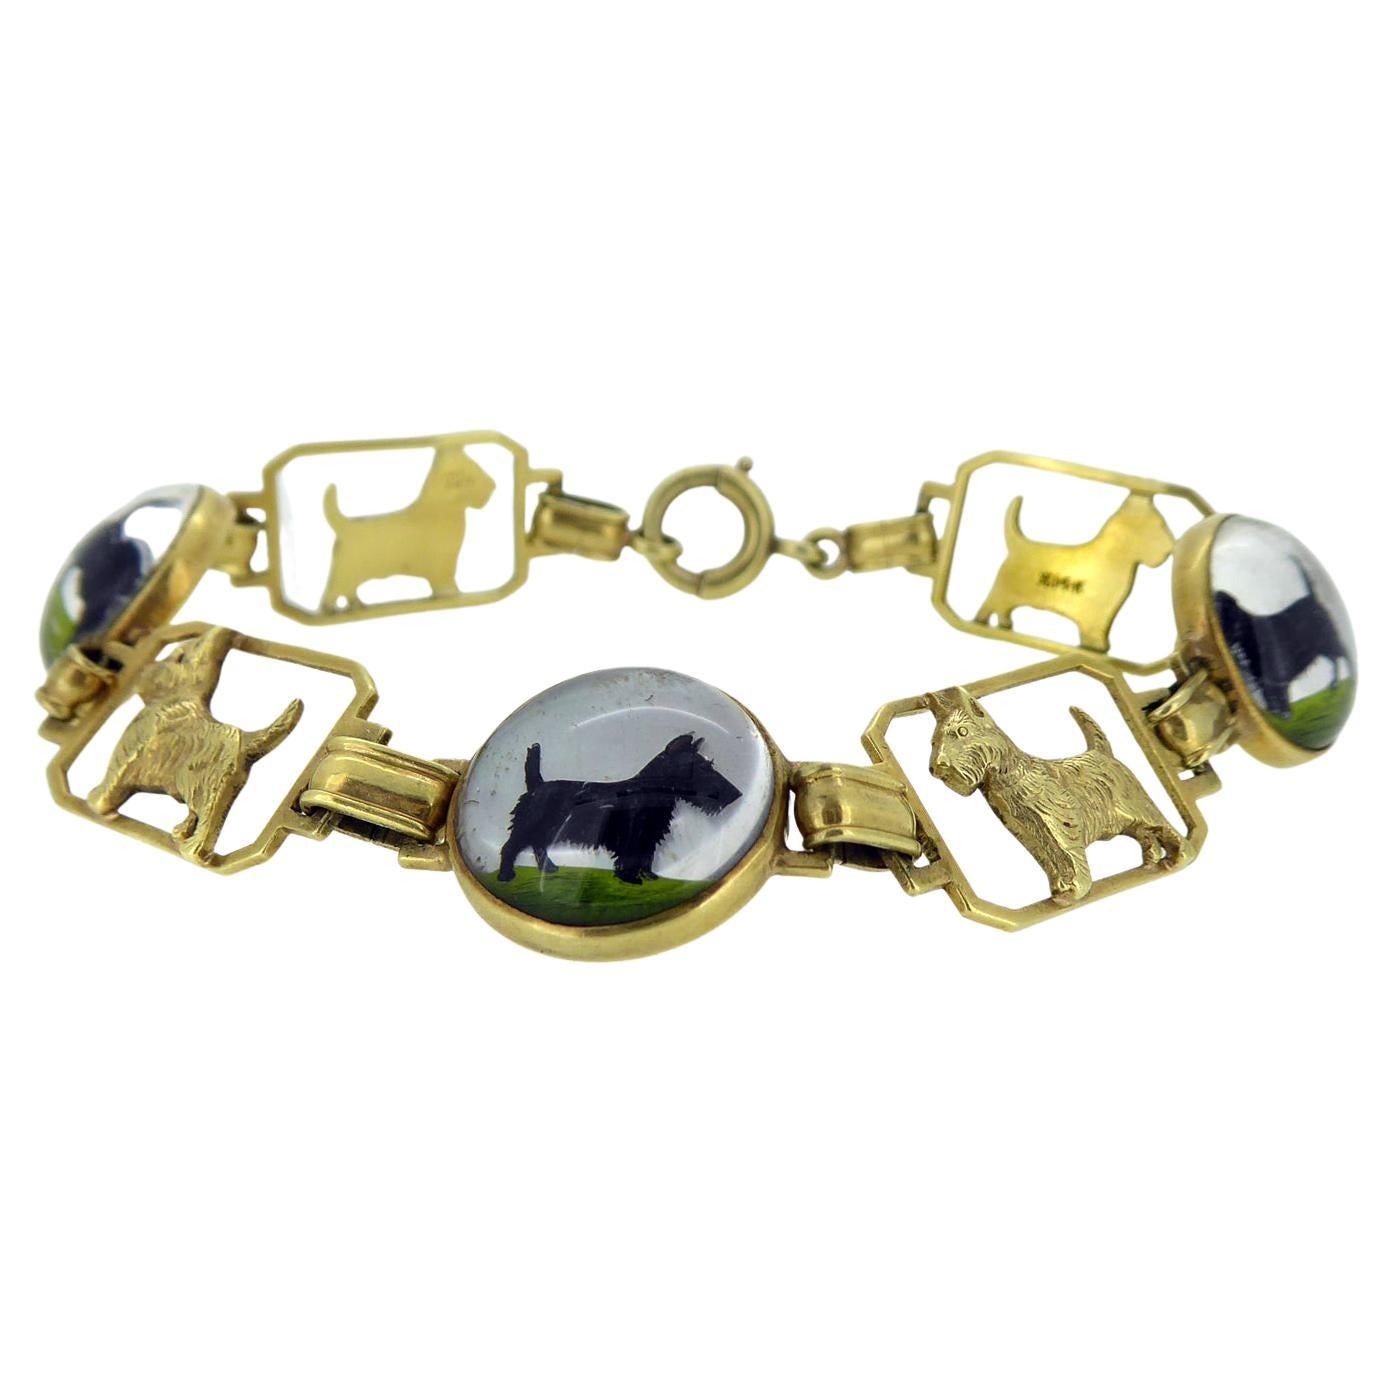 1930's/1940's Art Deco Scotty Dog Bracelet with Domed Crystal Links, Yellow Gold